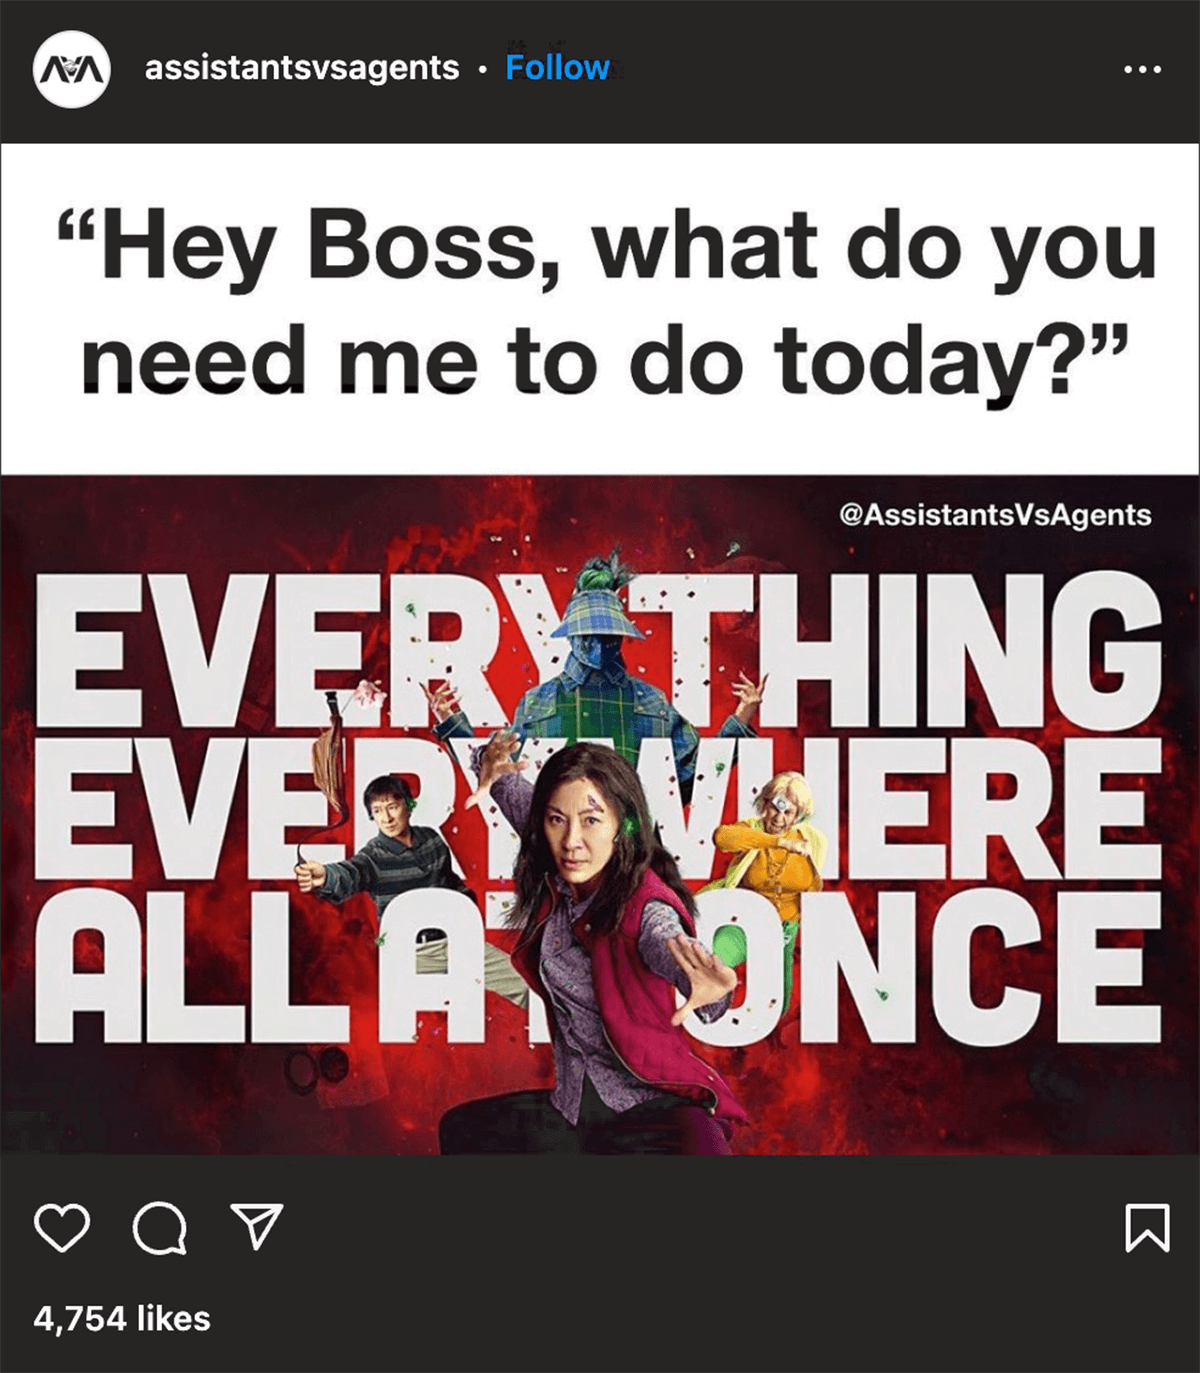 assistantsvsagents on Instagram: Hey Boss, what do you need me to do today? Movie poster for Everything, Everywhere, All at Once